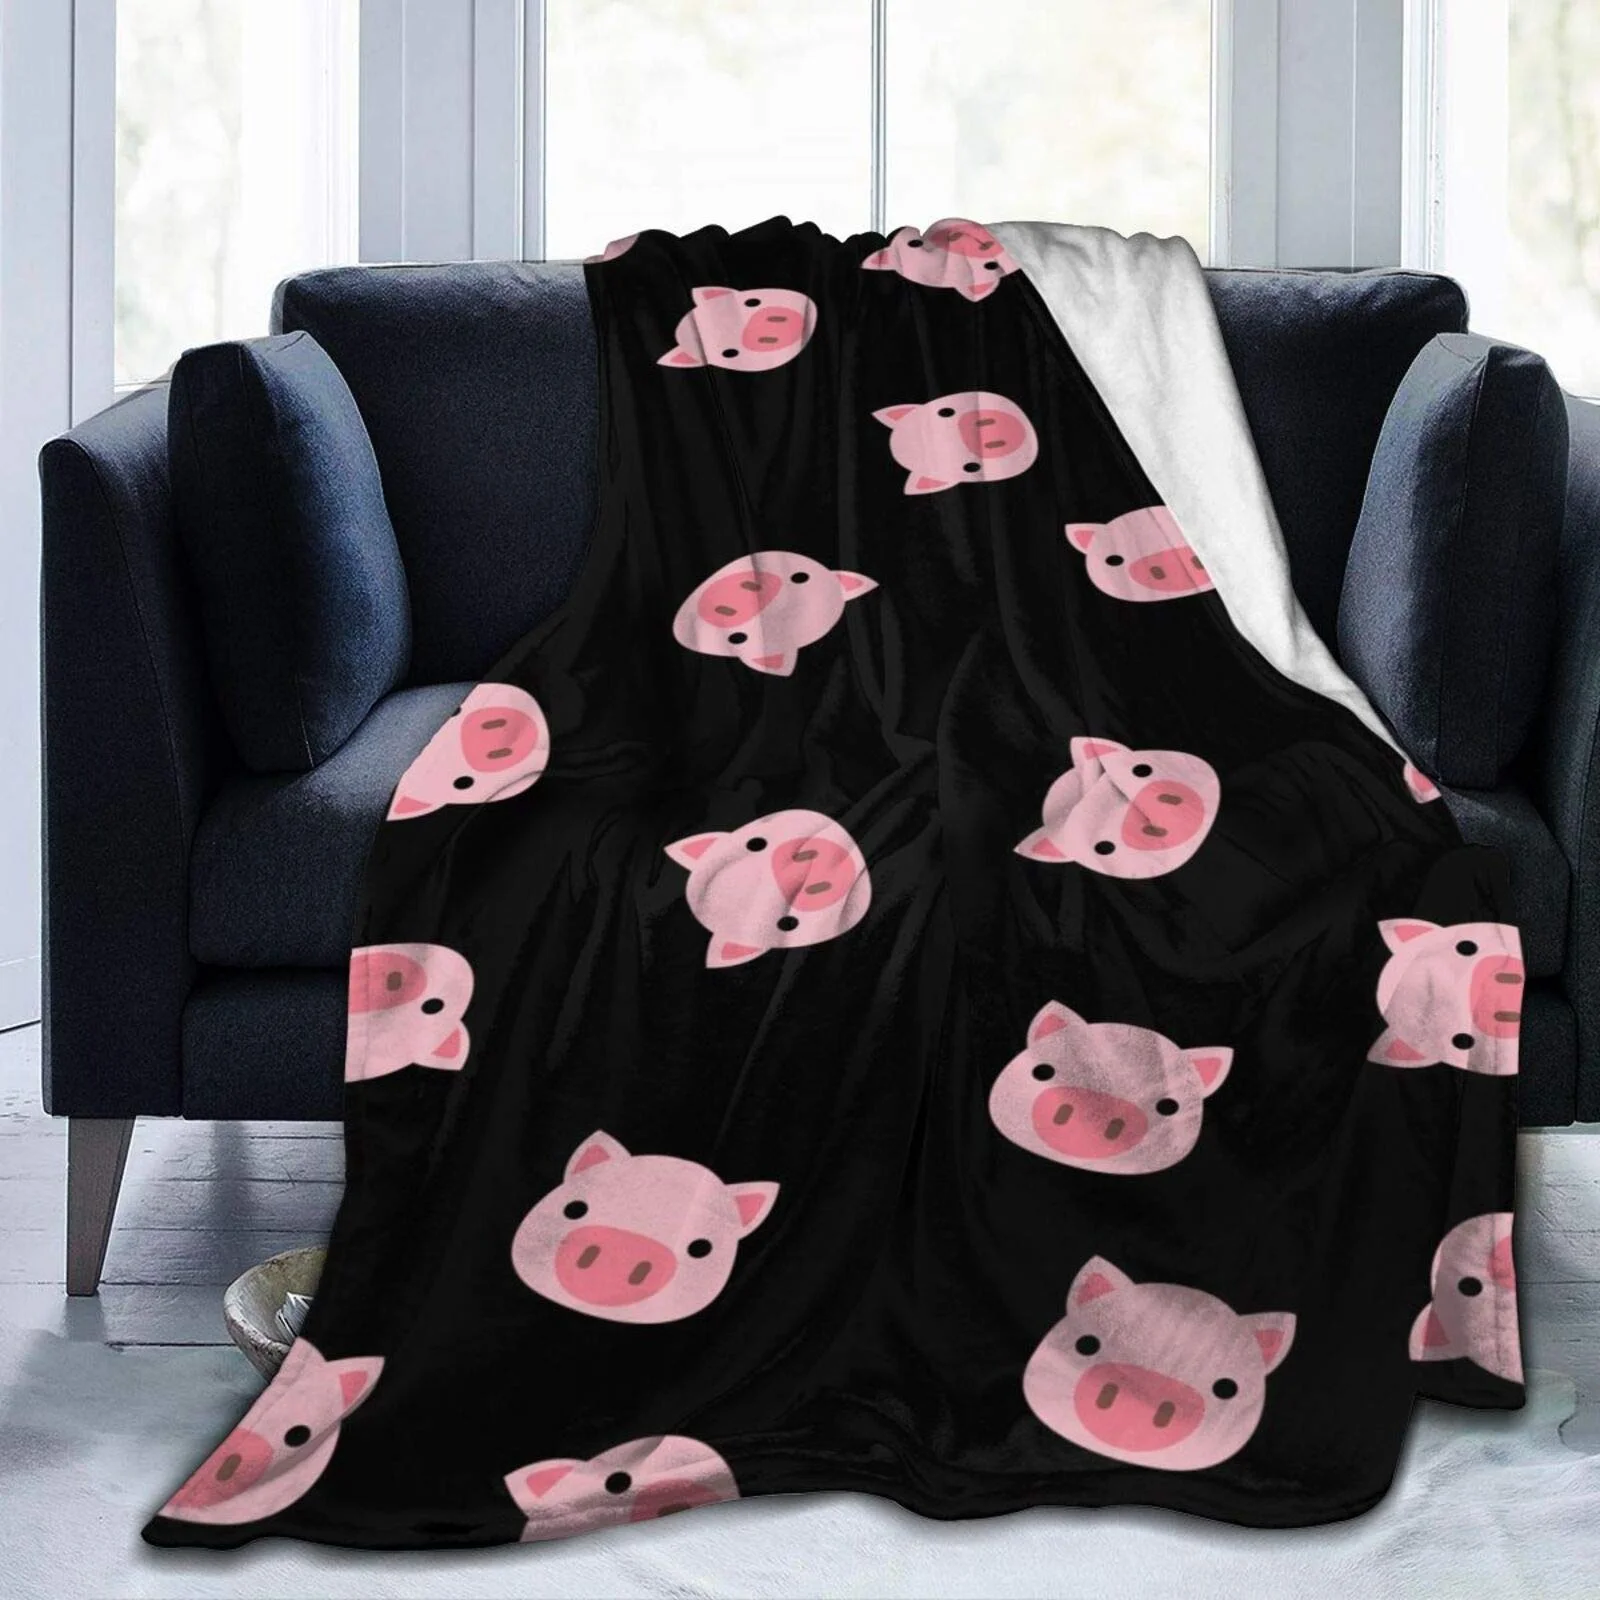 

Pink Pig Blanket Cute Cartoon Pig Face Flannel Fleece Blanket Super Soft And Fluffy Warm Sofa Bed Travel Camping Blanket 50X40